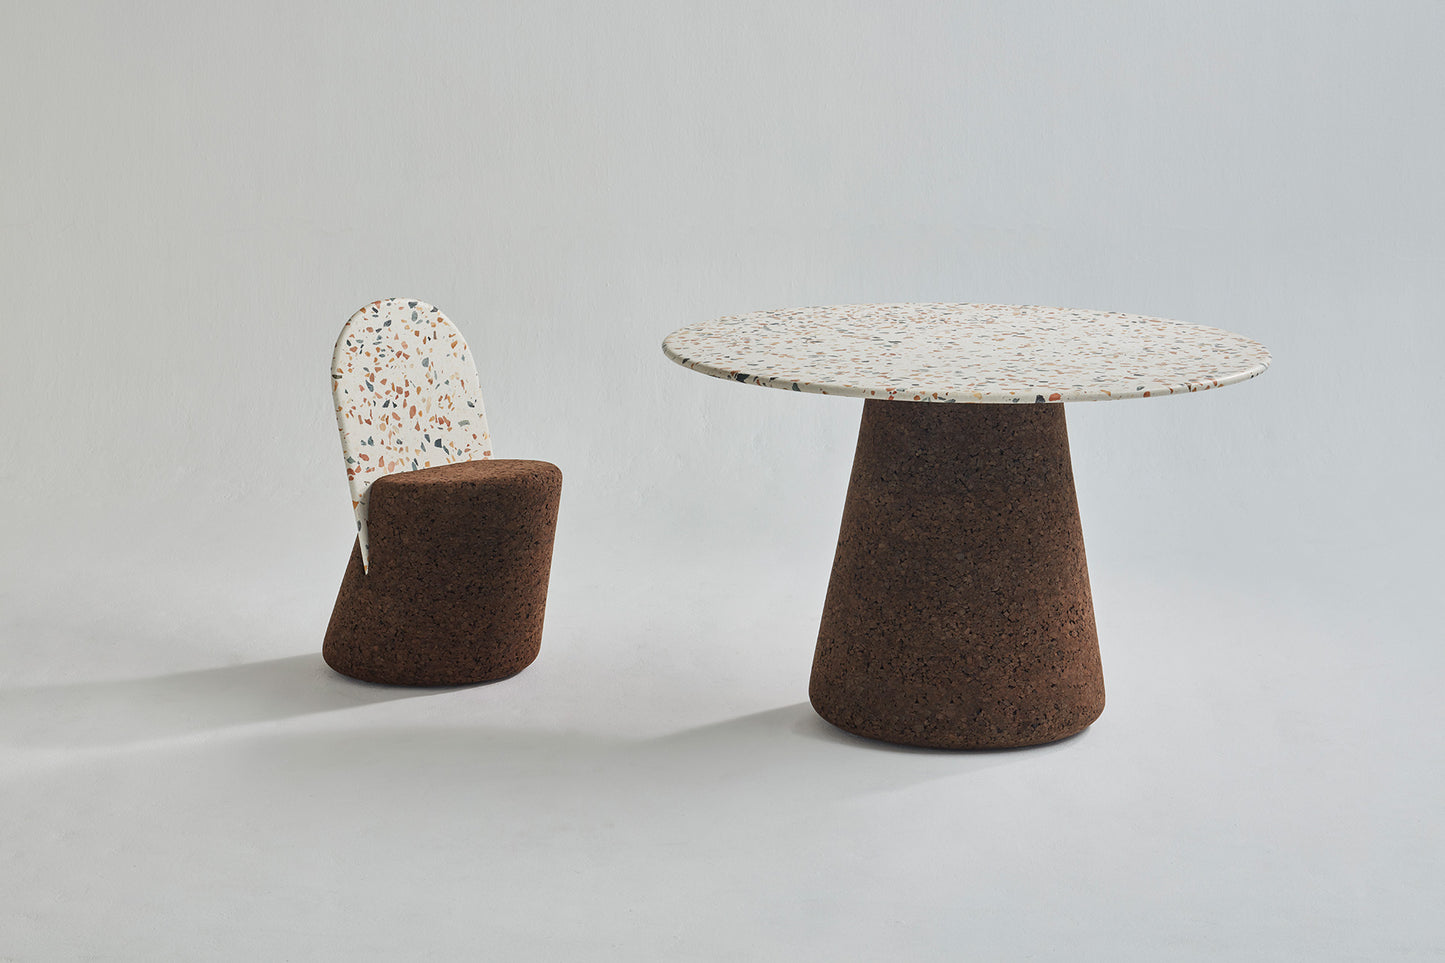 Elegant dining set from Kanju featuring the Wiid Design Terrazzo and Cork Dining Table in Dark Cork, paired with matching Wiid Design Terrazzo and Cork Dining Chairs. This sophisticated ensemble combines the unique beauty of terrazzo with the natural warmth of dark cork, offering a stunning example of sustainable luxury and innovative design. Ideal for those who appreciate artisan craftsmanship and eco-friendly materials in their dining space.